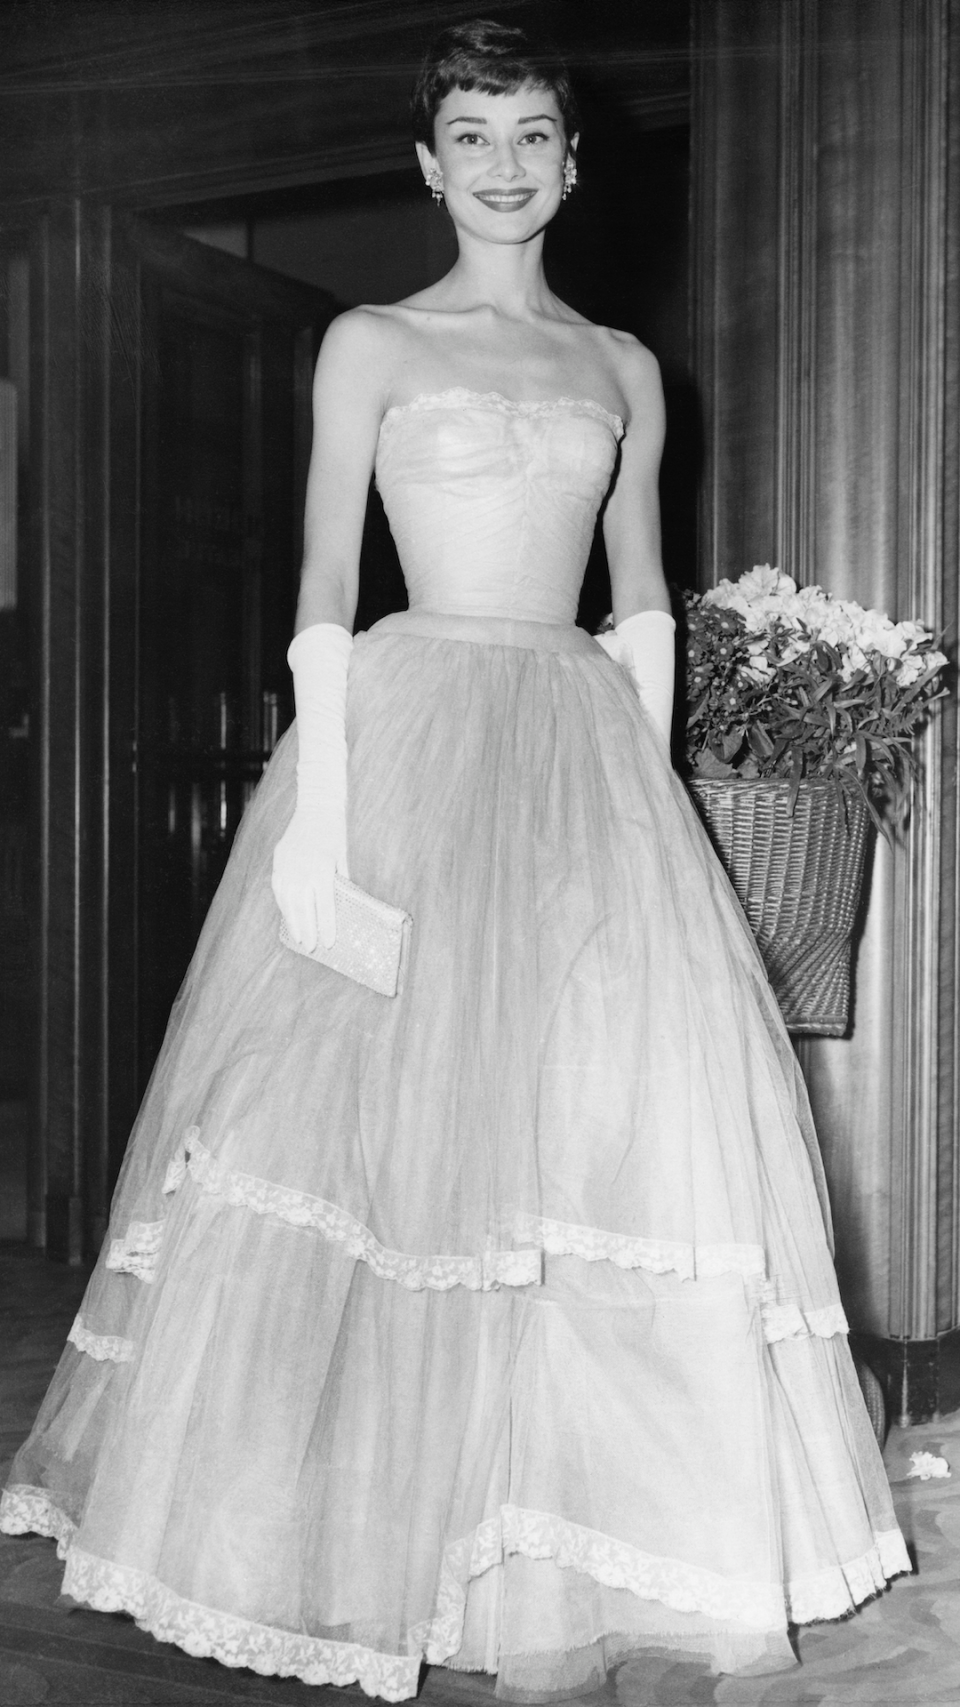 <p> Audrey Hepburn is the definition of old school Hollywood glamour. At the BAFTAs in 1955, the iconic actress wore a sweeping strapless gown - featuring a voluminous skirt - and finished off the look with long white gloves and a clutch bag. </p>